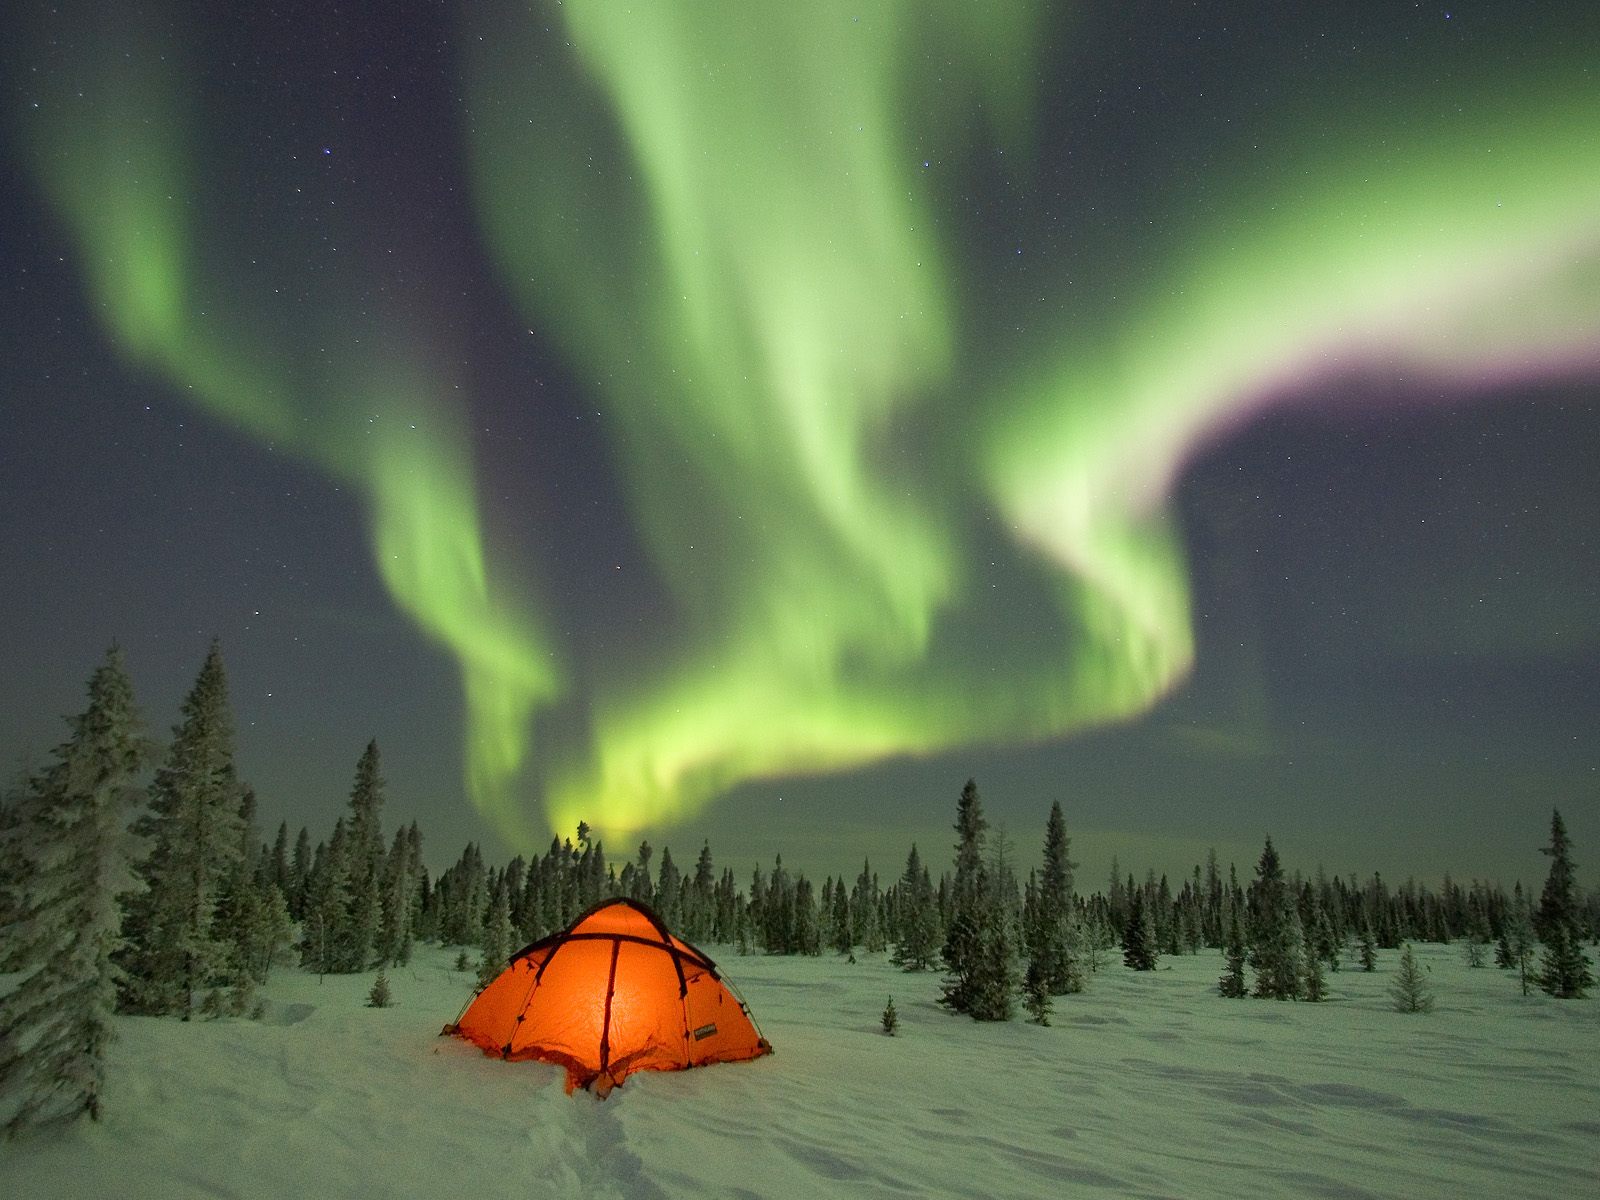 camping_under_the_northern_lights_boreal_forest_canada_wallpaper-normal.jpg